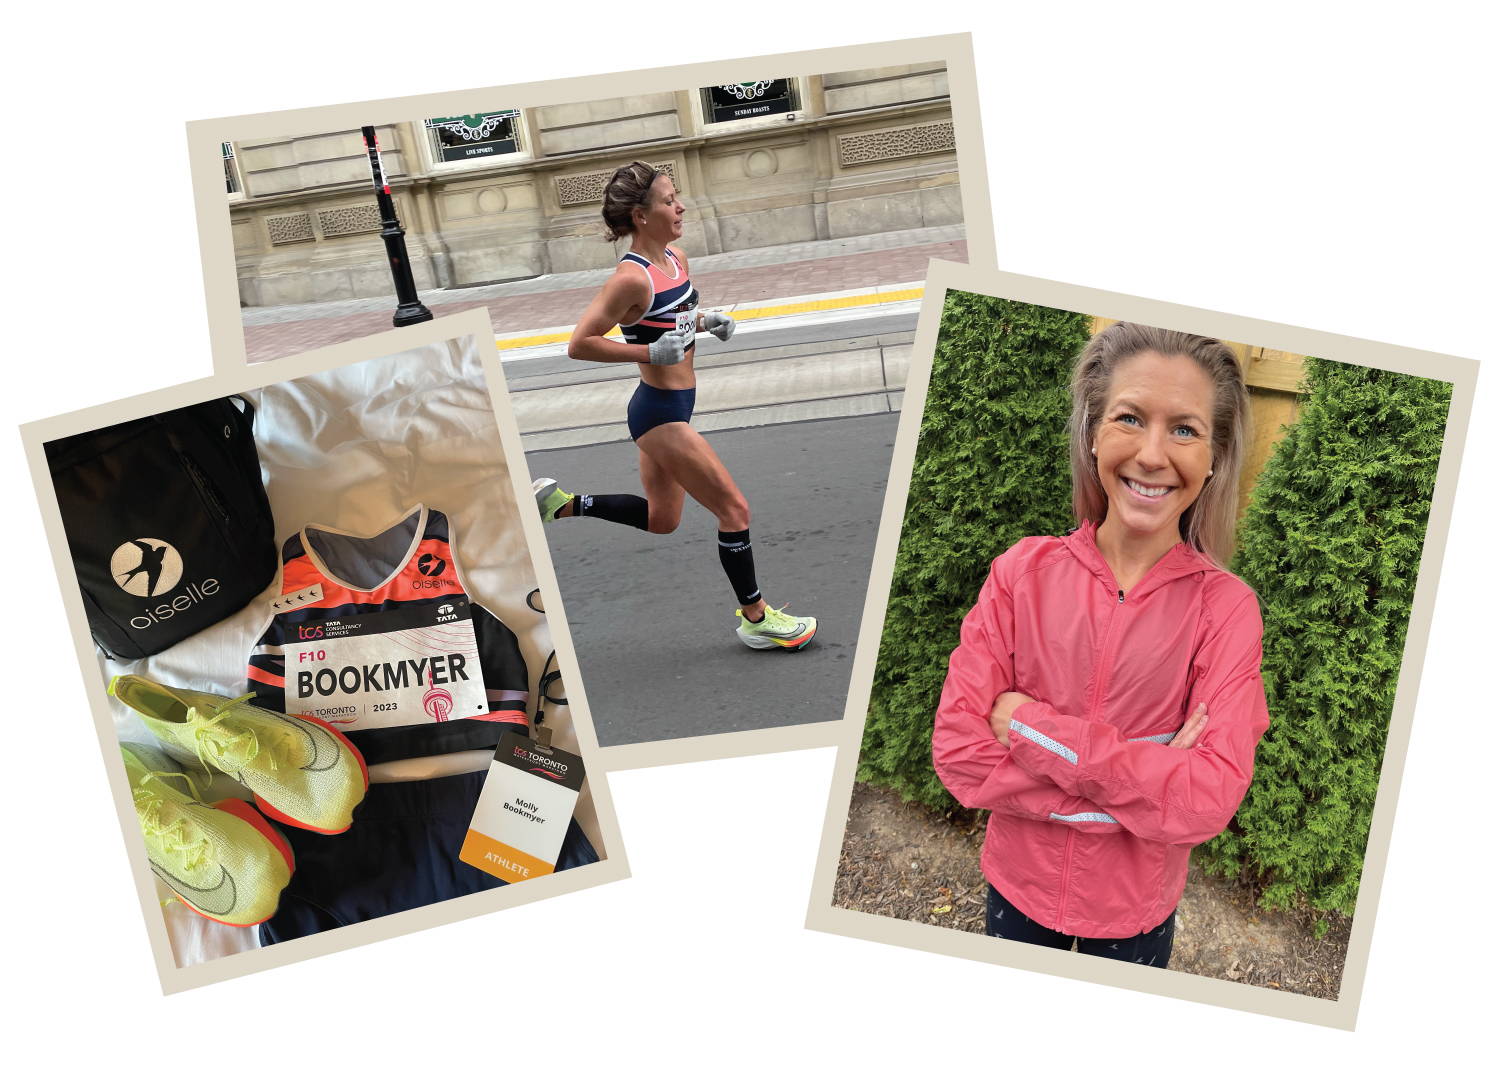 Molly Bookmyer racing the Toronto Marathon in her Oiselle race kit, and smiling for the camera before her race